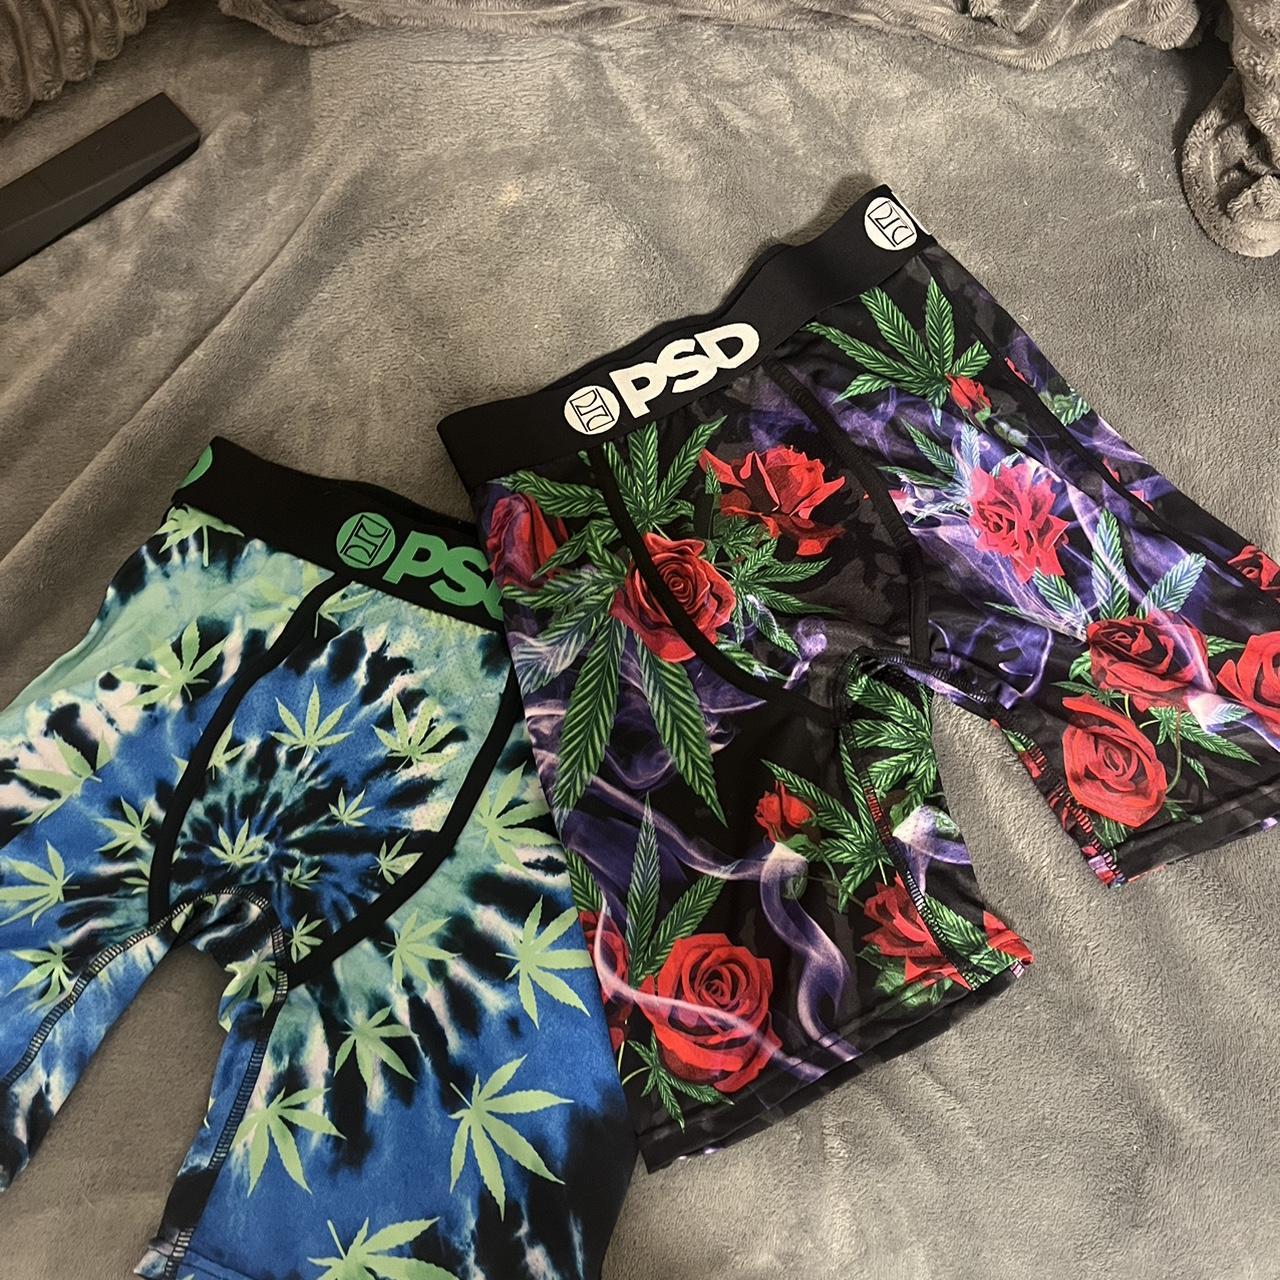 Saw ed hardy underwear selling for $45 on depop. Turns out they're